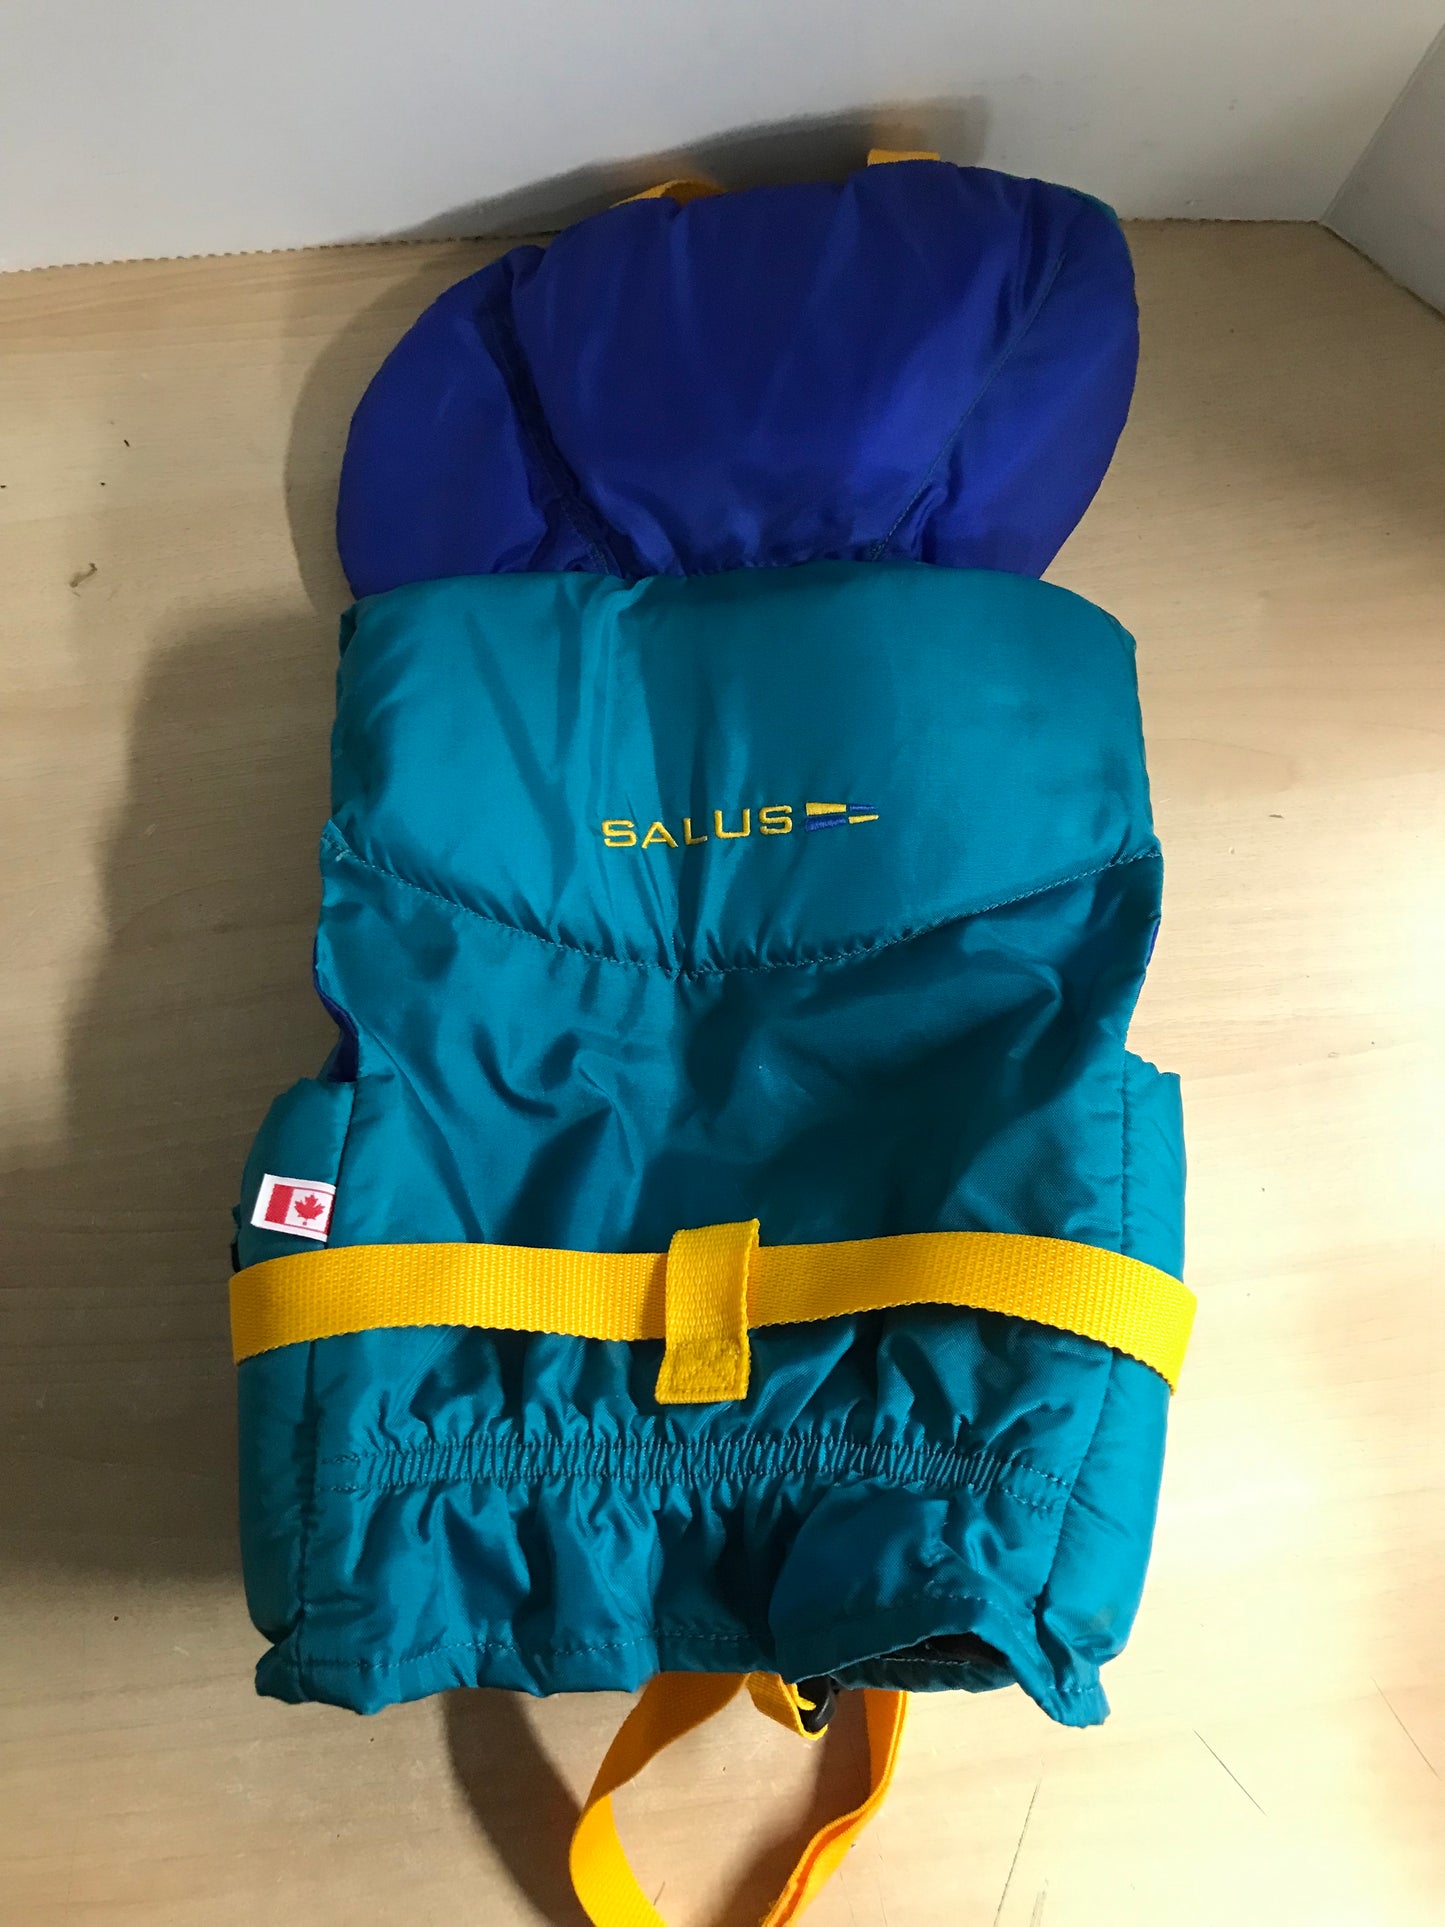 Life Jacket Child Size 30-60 Lb Salus Double Neck Support Teal Yellow Excellent